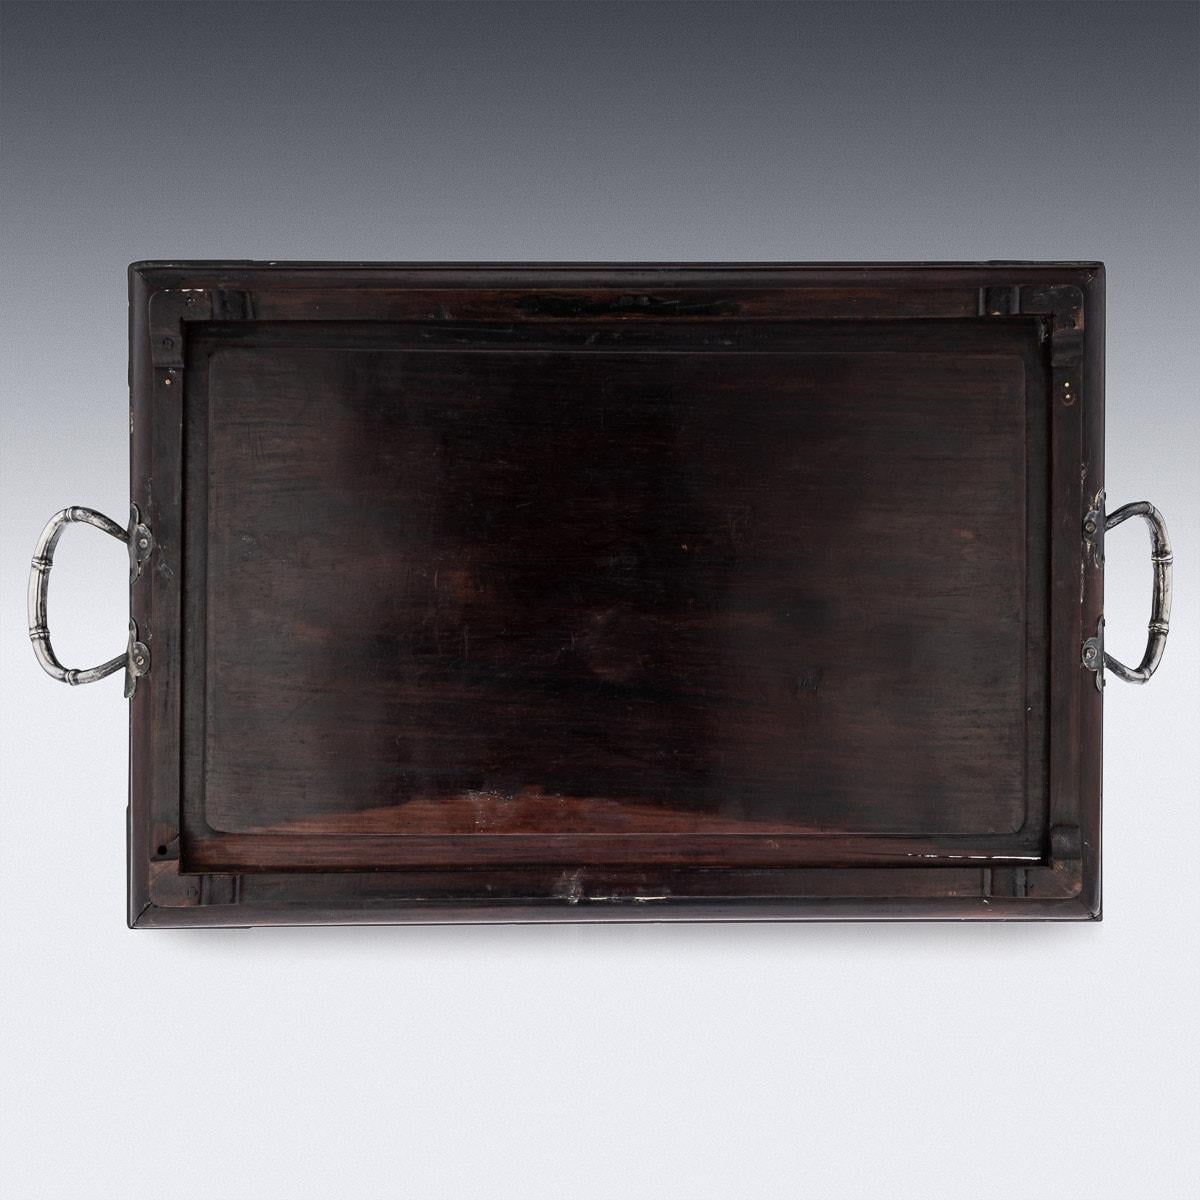 Antique early-20th century Chinese export solid silver impressively large tea tray, bamboo shaped handles and corner plaques chased with matted ground. Mounted on a large rosewood serving tray, of rectangular form, the surface is inlaid with silver